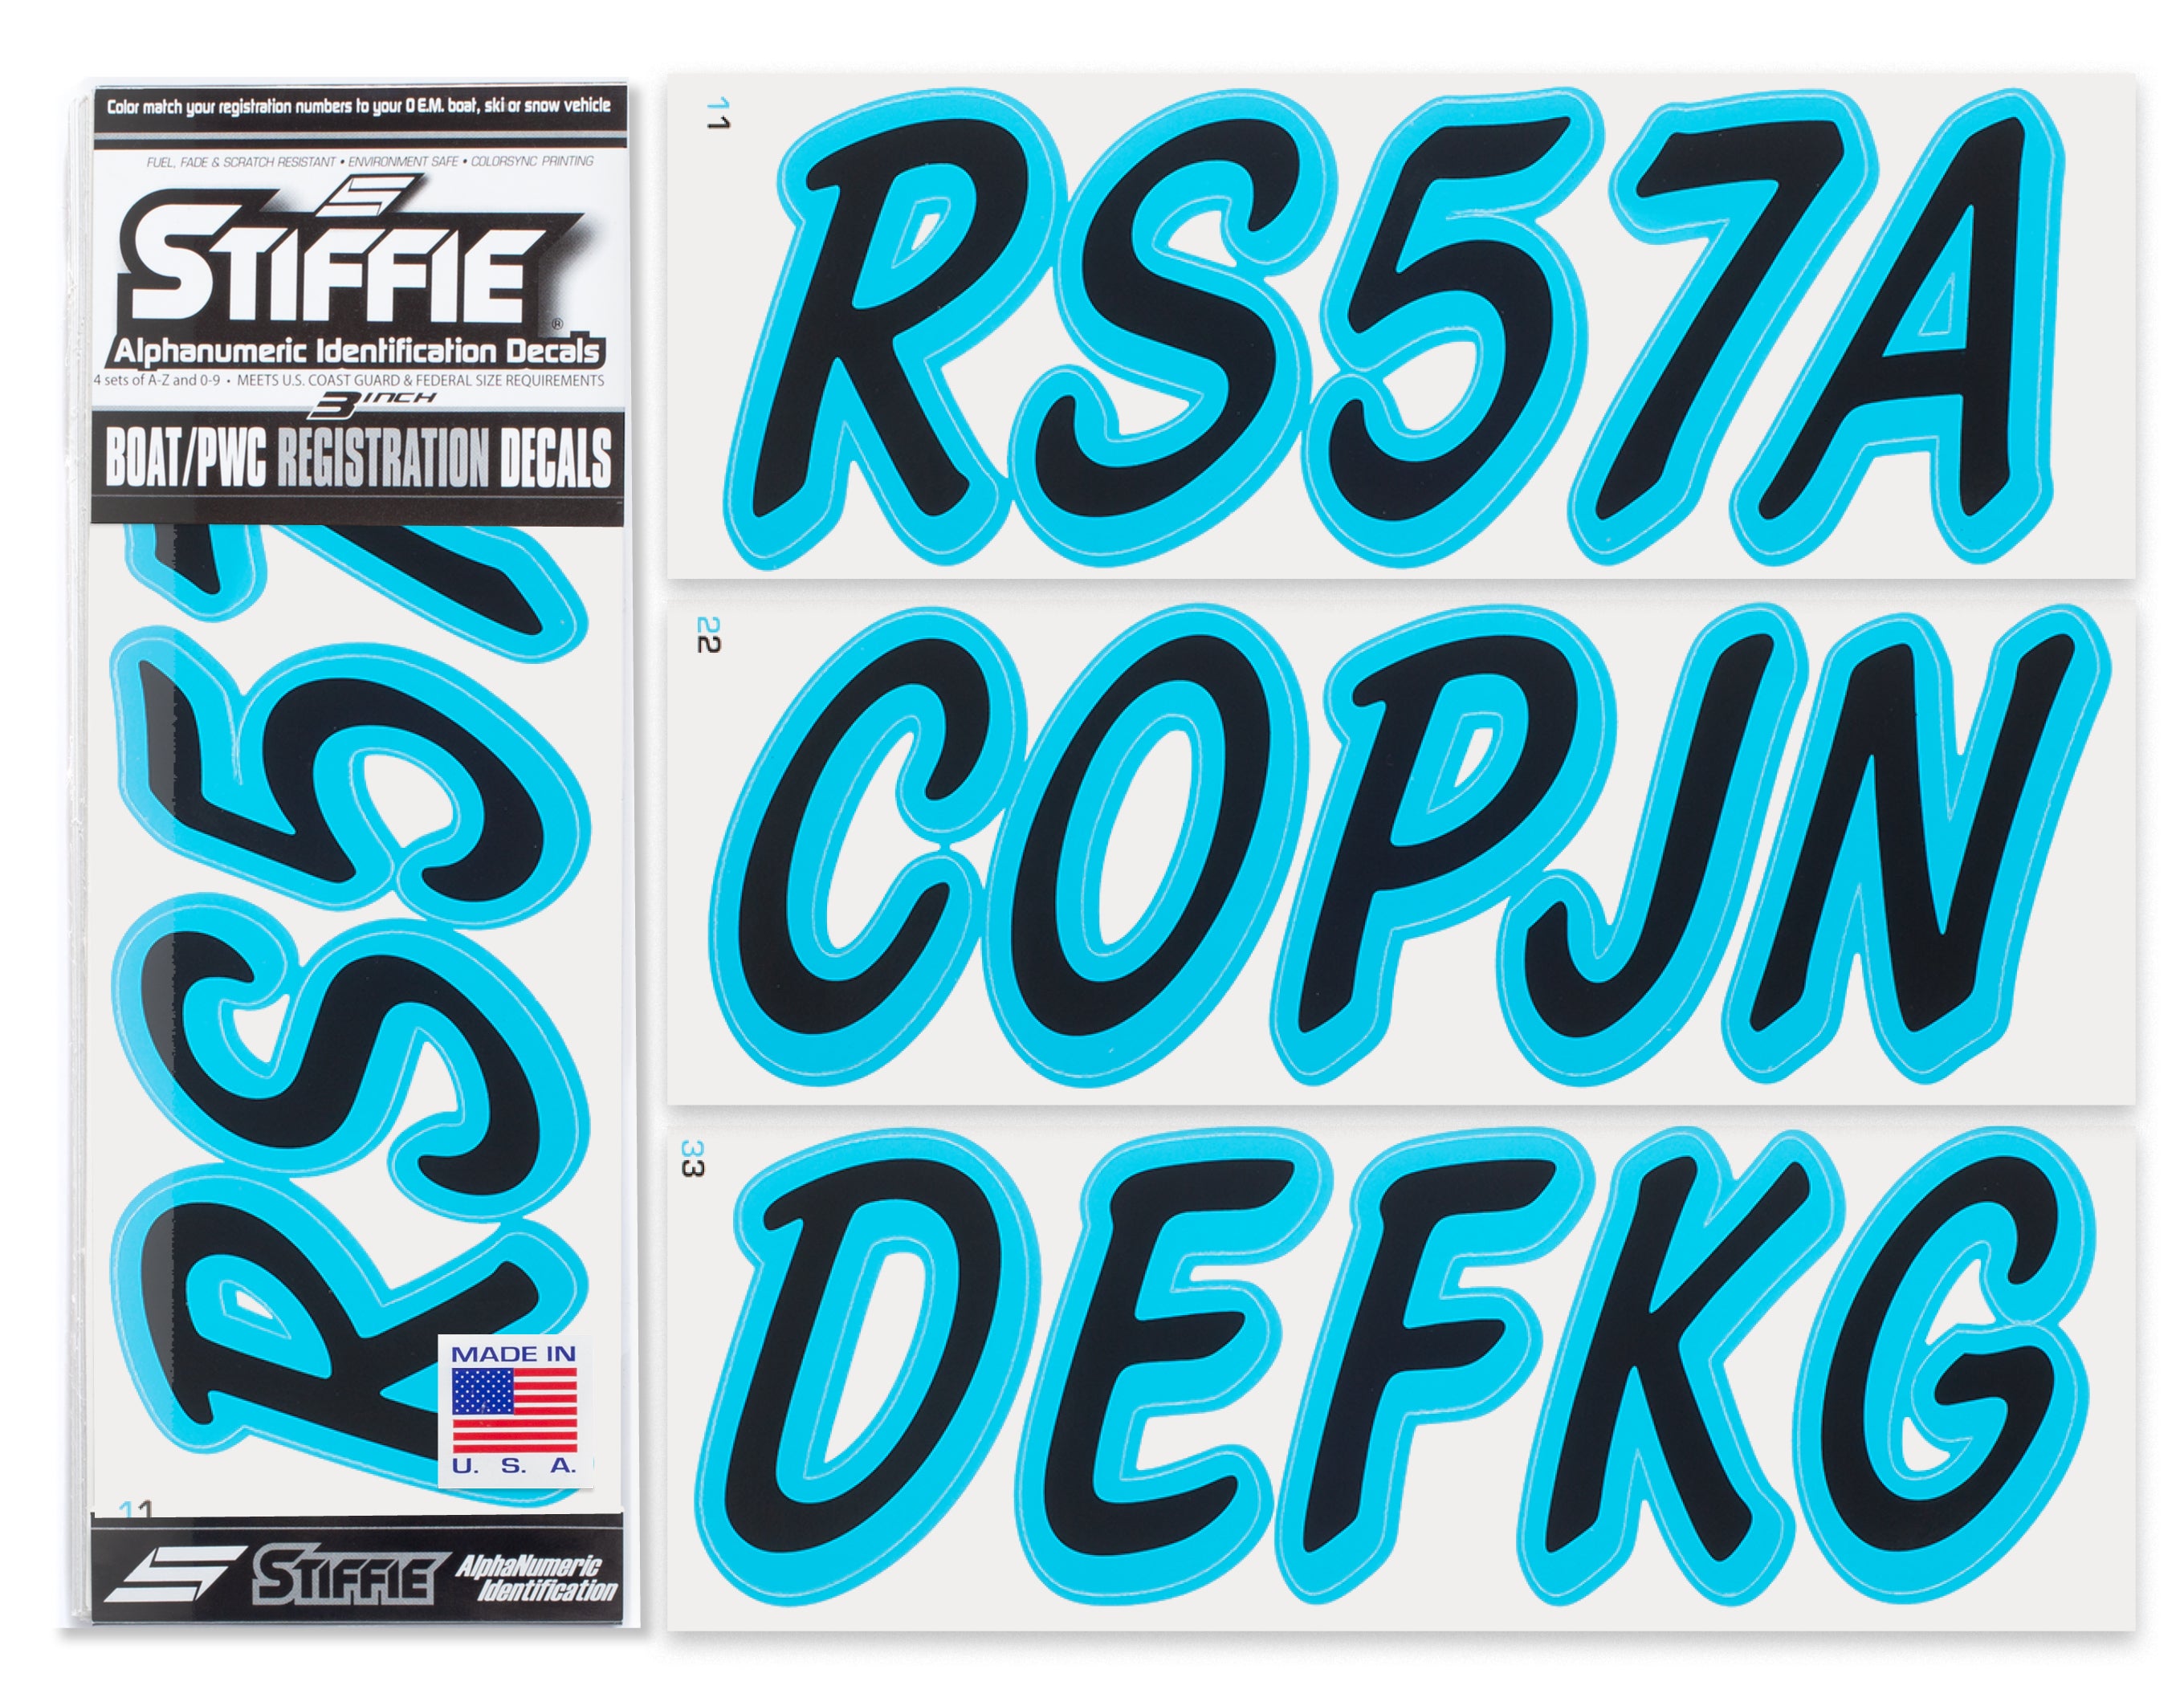 STIFFIE Whipline Solid Black/Sky Blue 3" Alpha-Numeric Registration Identification Numbers Stickers Decals for Boats & Personal Watercraft